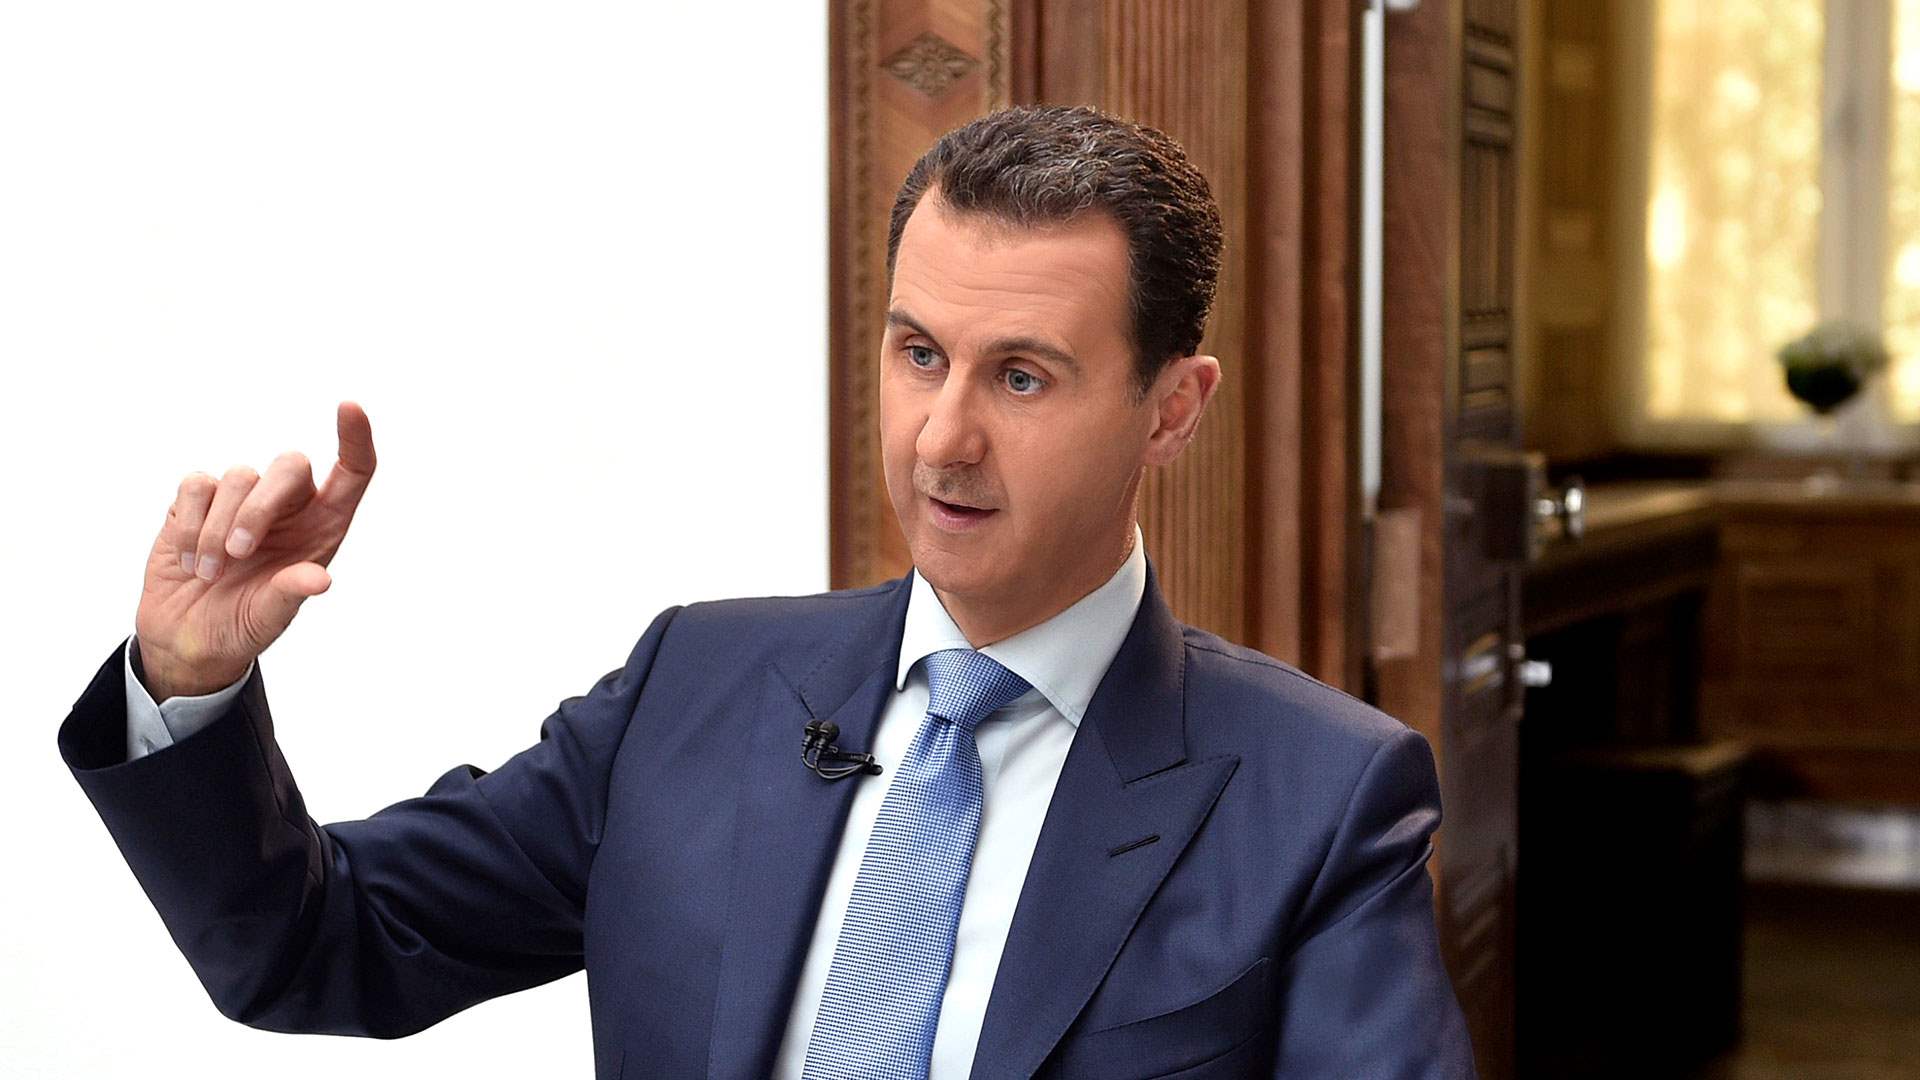 Syrian President Al-Assad says war in Syria is not over